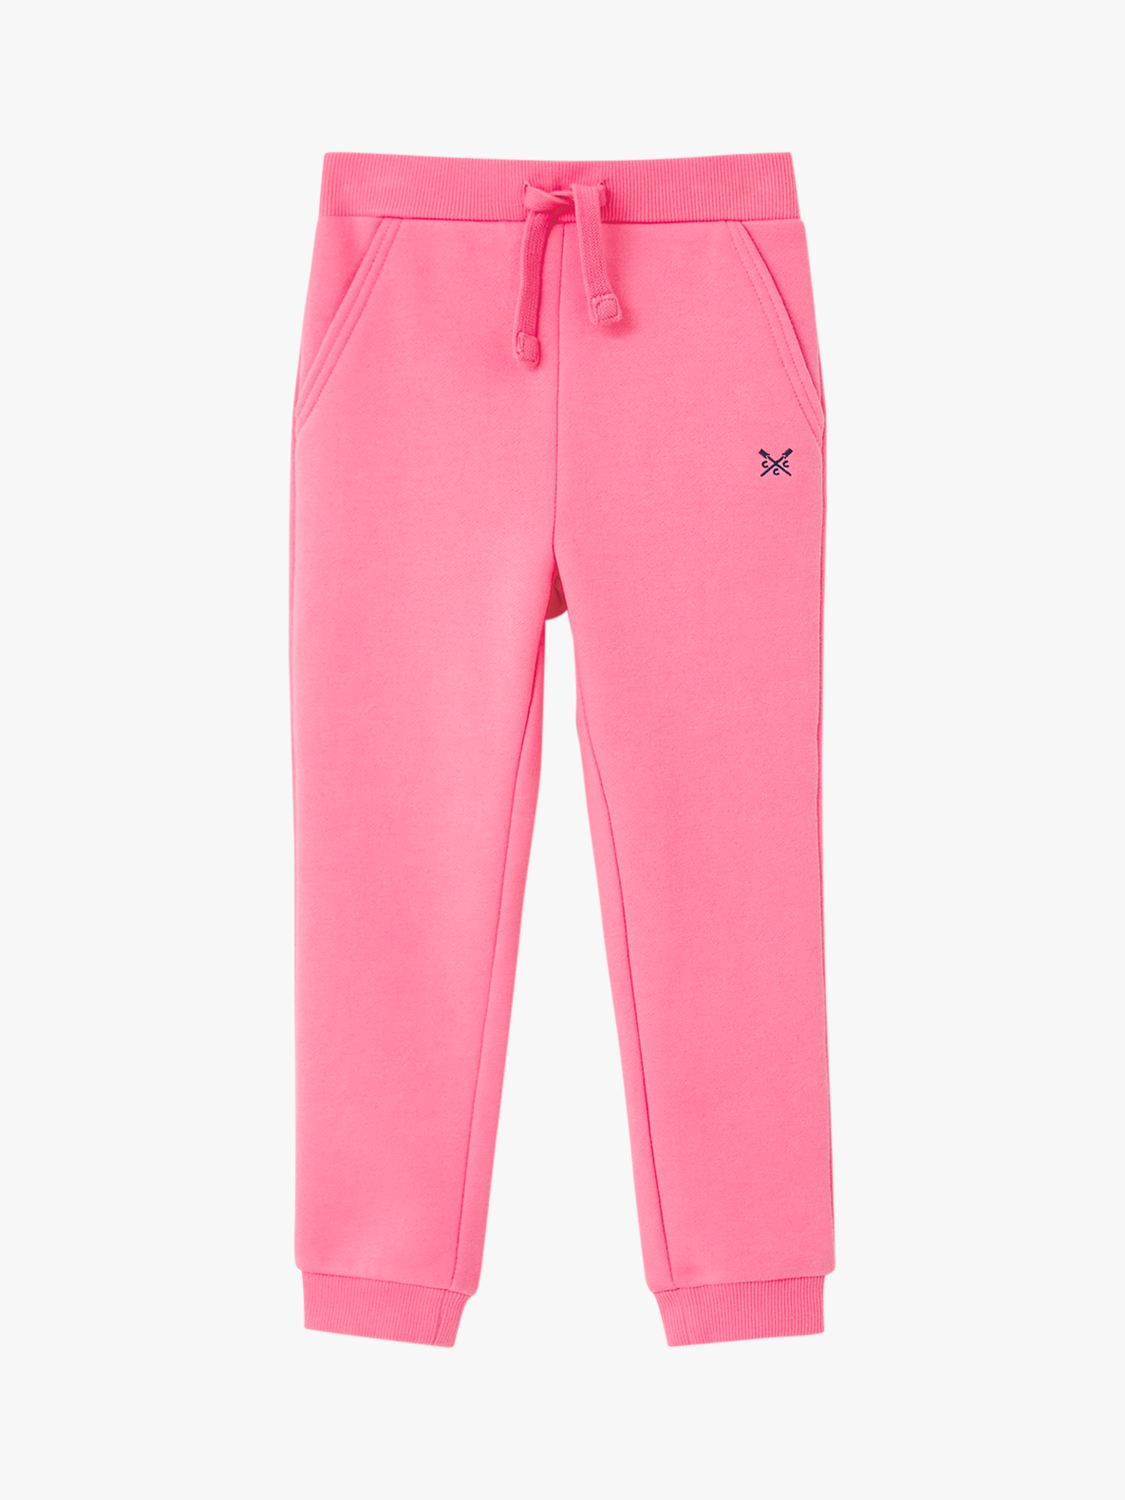 Sweat Pants Pink Rainbow for Girls / Slim Fit Joggers Child Baby